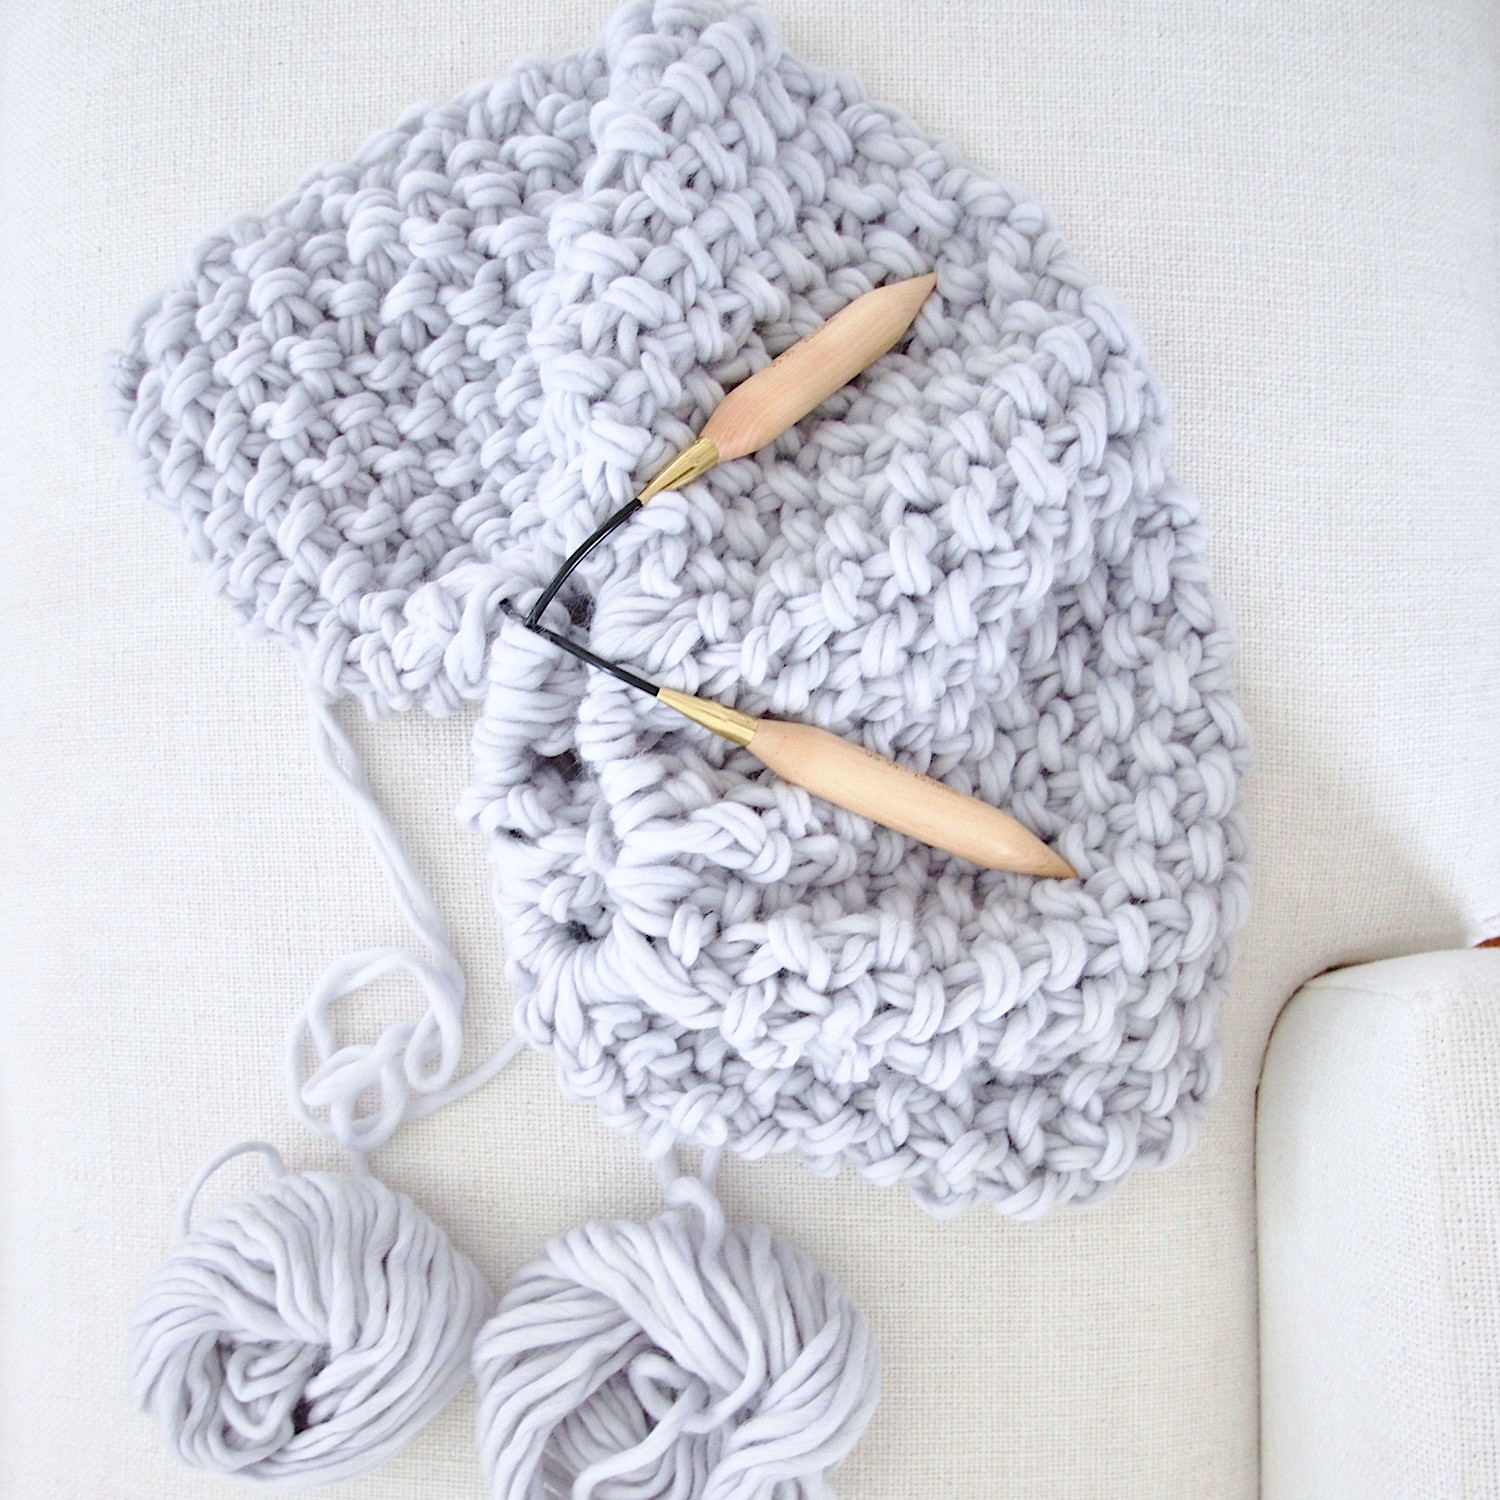 Birch knitting needles | Free Chunky Wool Blanket Pattern Download | Design The Life You Want To Live | Lynne Knowlton